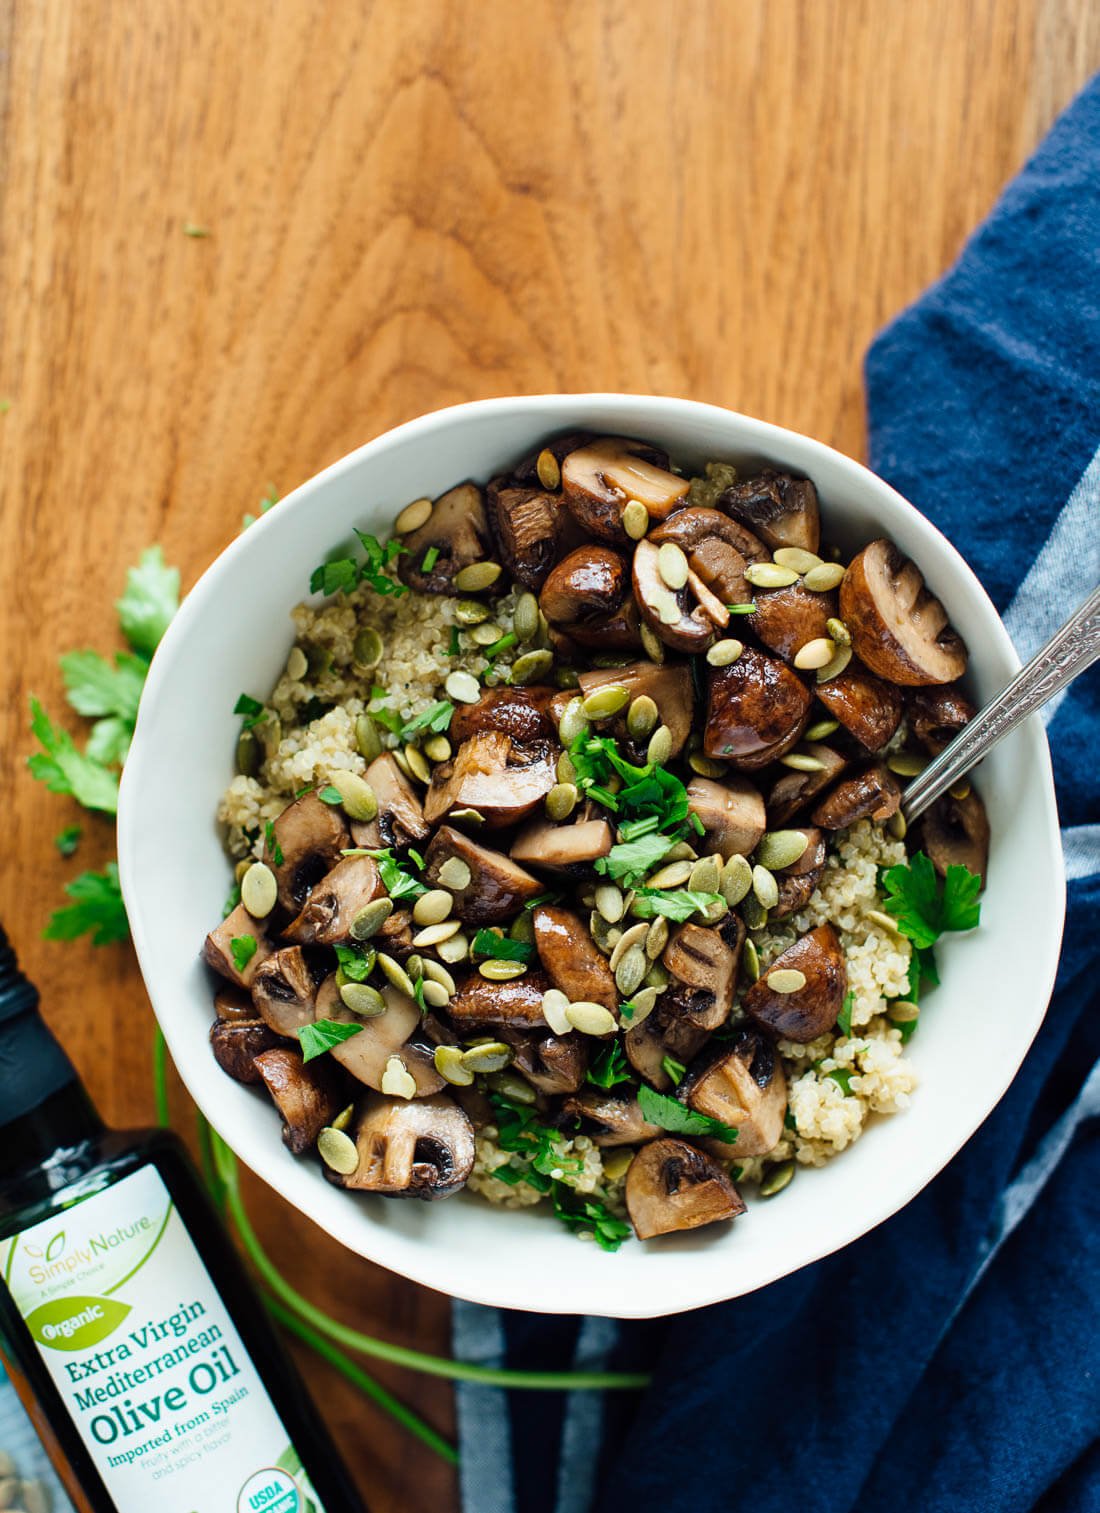 Here's a delicious side dish—roasted mushrooms on herbed quinoa! Vegetarian.